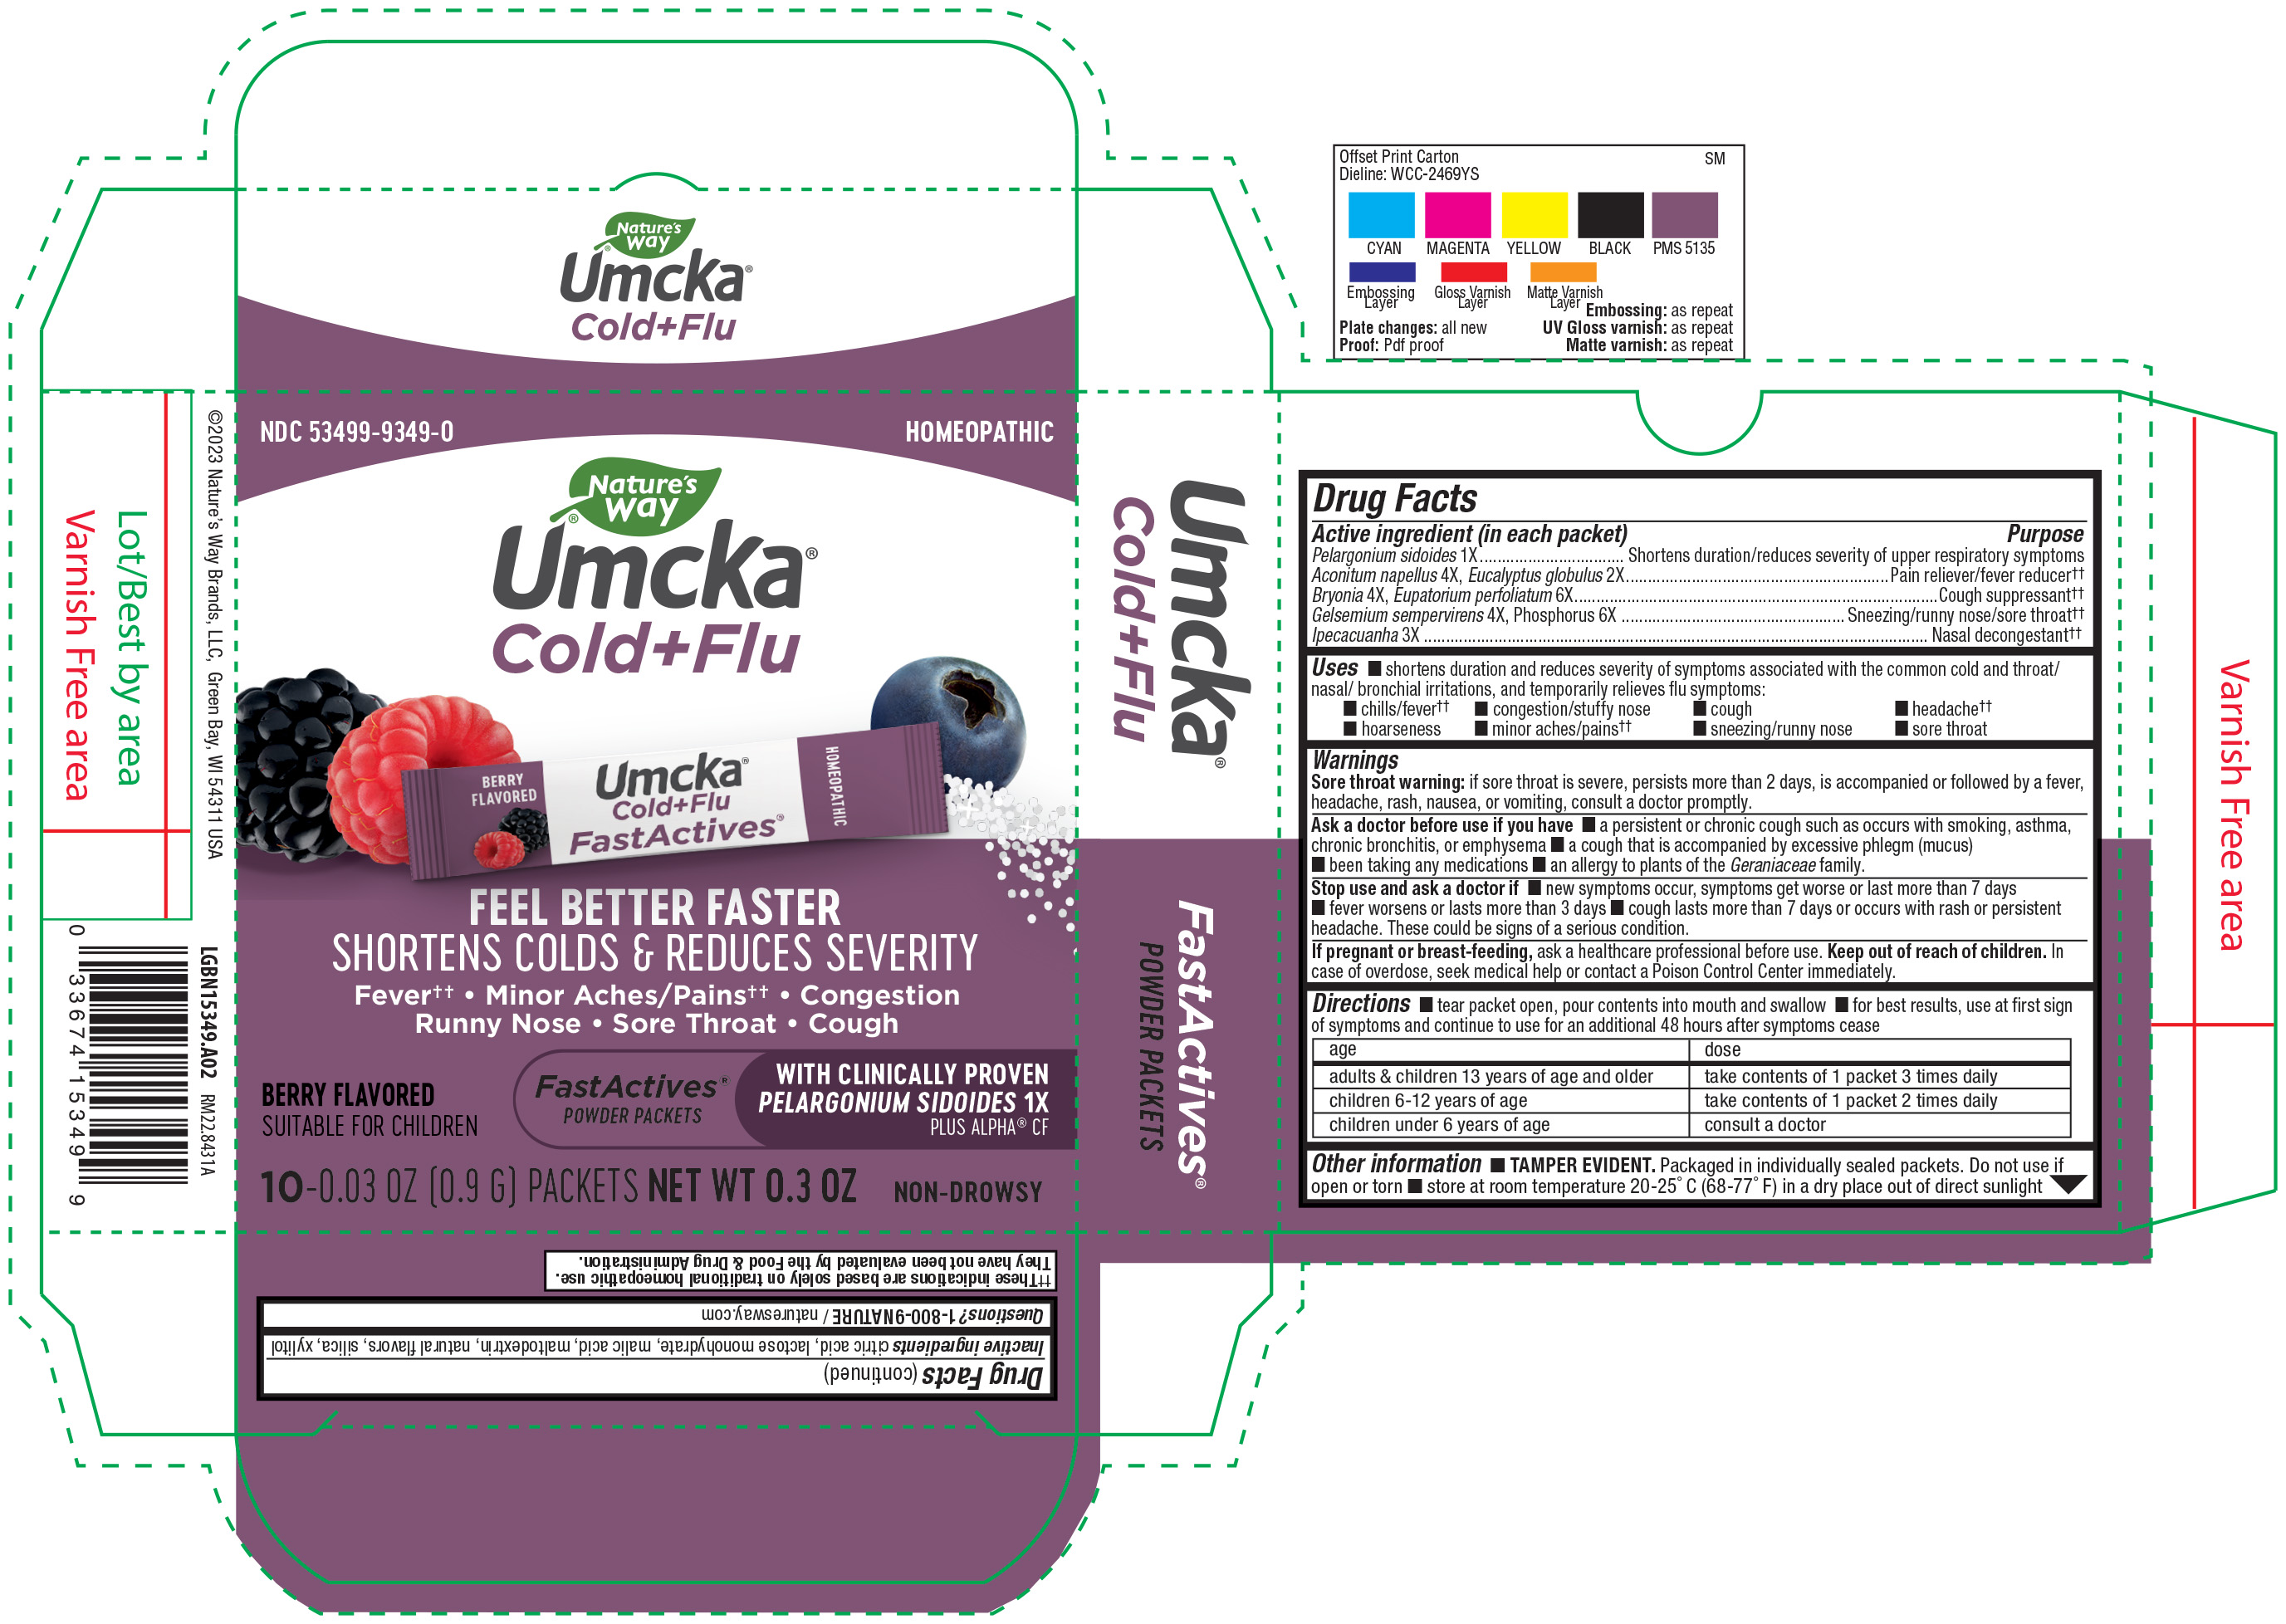 LGBN15349.A02 Umcka Cold & Flu Berry Fastactives 10 ct.jpg